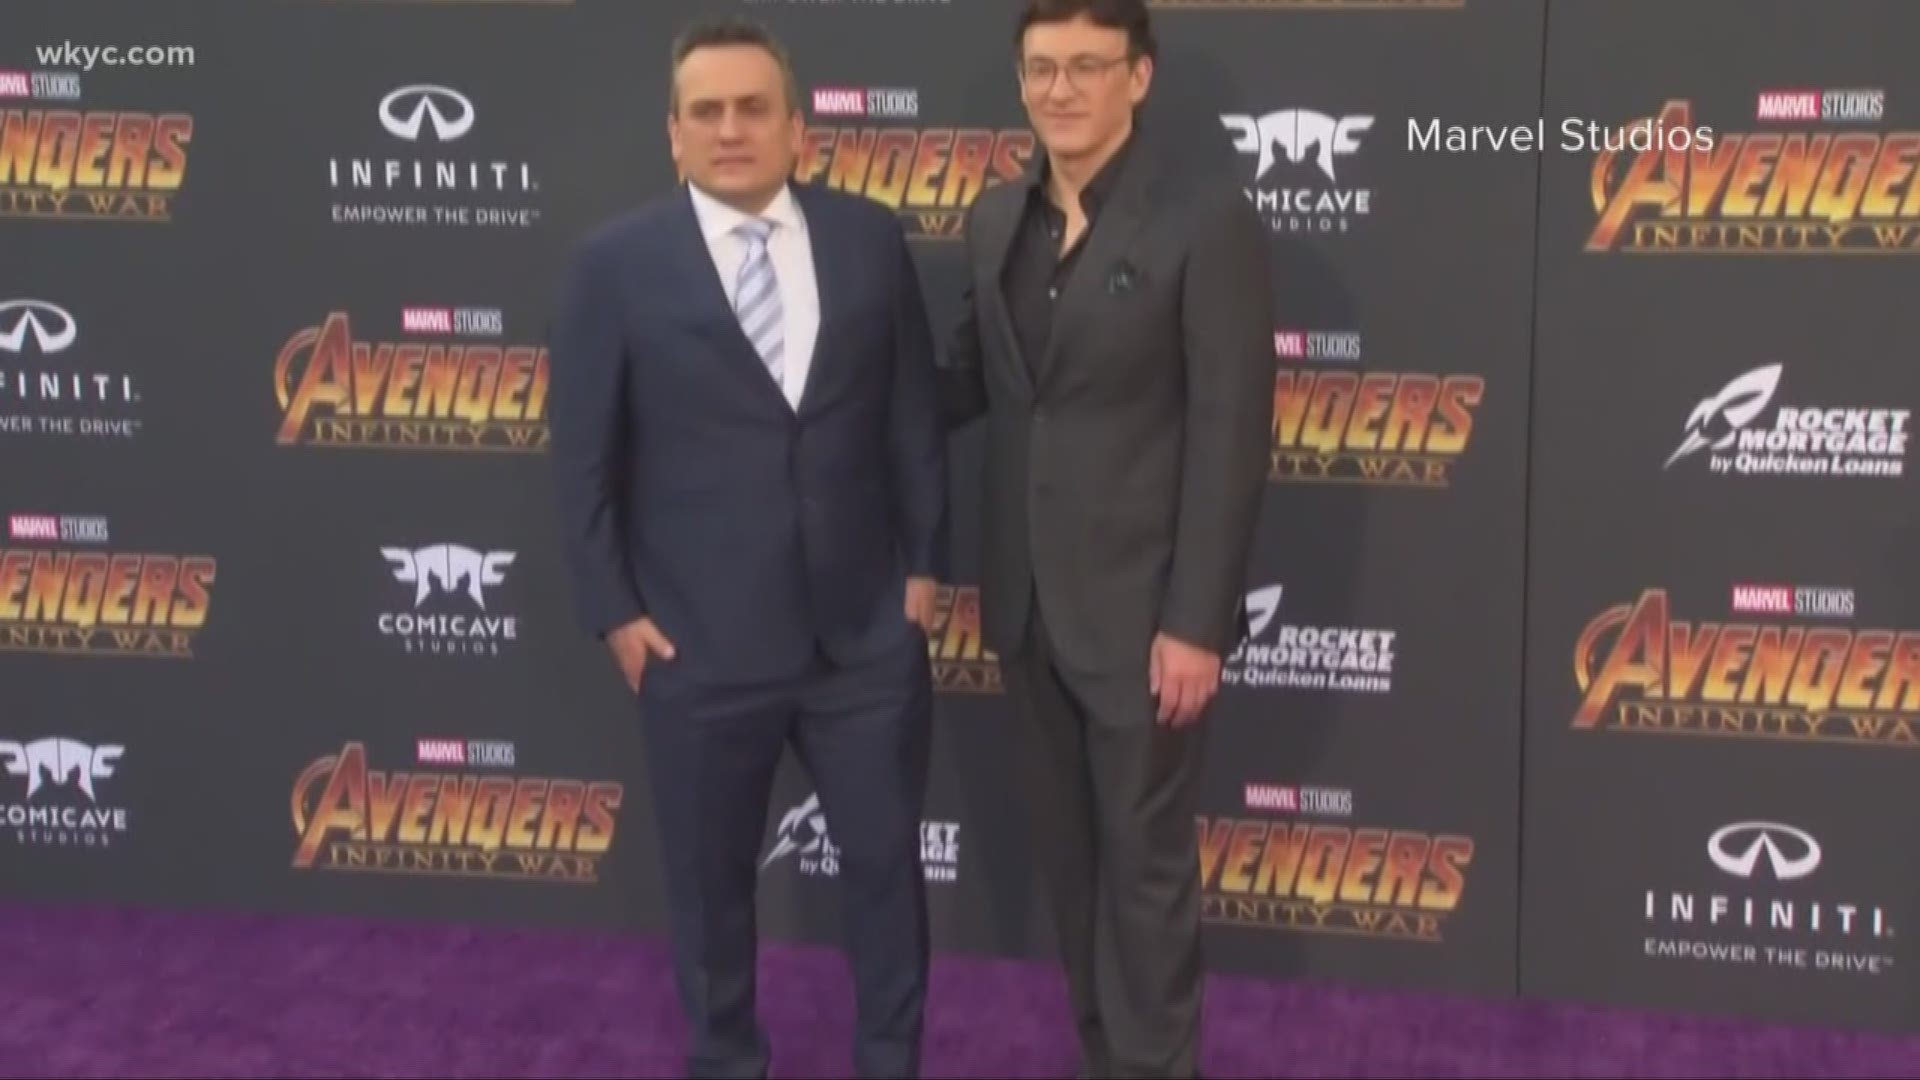 The directors behind the movie Avengers: Endgame have announced they’re coming back to Cleveland to shoot their next film. Cherry will star Spider-Man's Tom Holland.